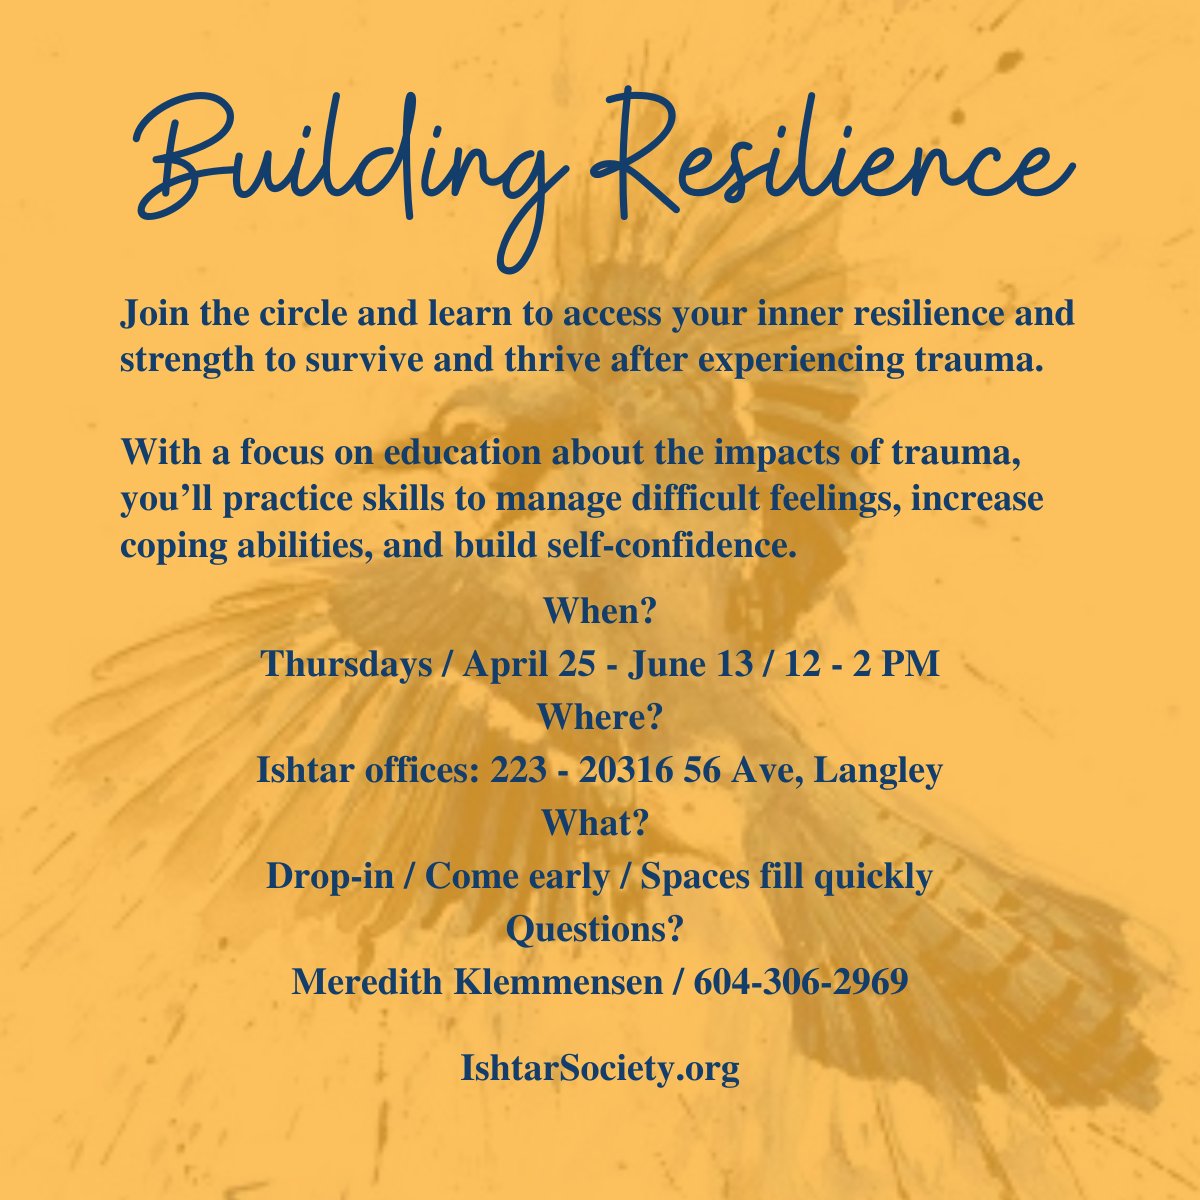 📣Starting this week, Thurs, Apr 25! BUILDING RESILIENCE returns to Ishtar. #BuildingResilience is an 8-wk drop-in style group for women, where you'll learn to access your inner strength to survive and thrive after experiencing trauma. Details on poster. IshtarSociety.org